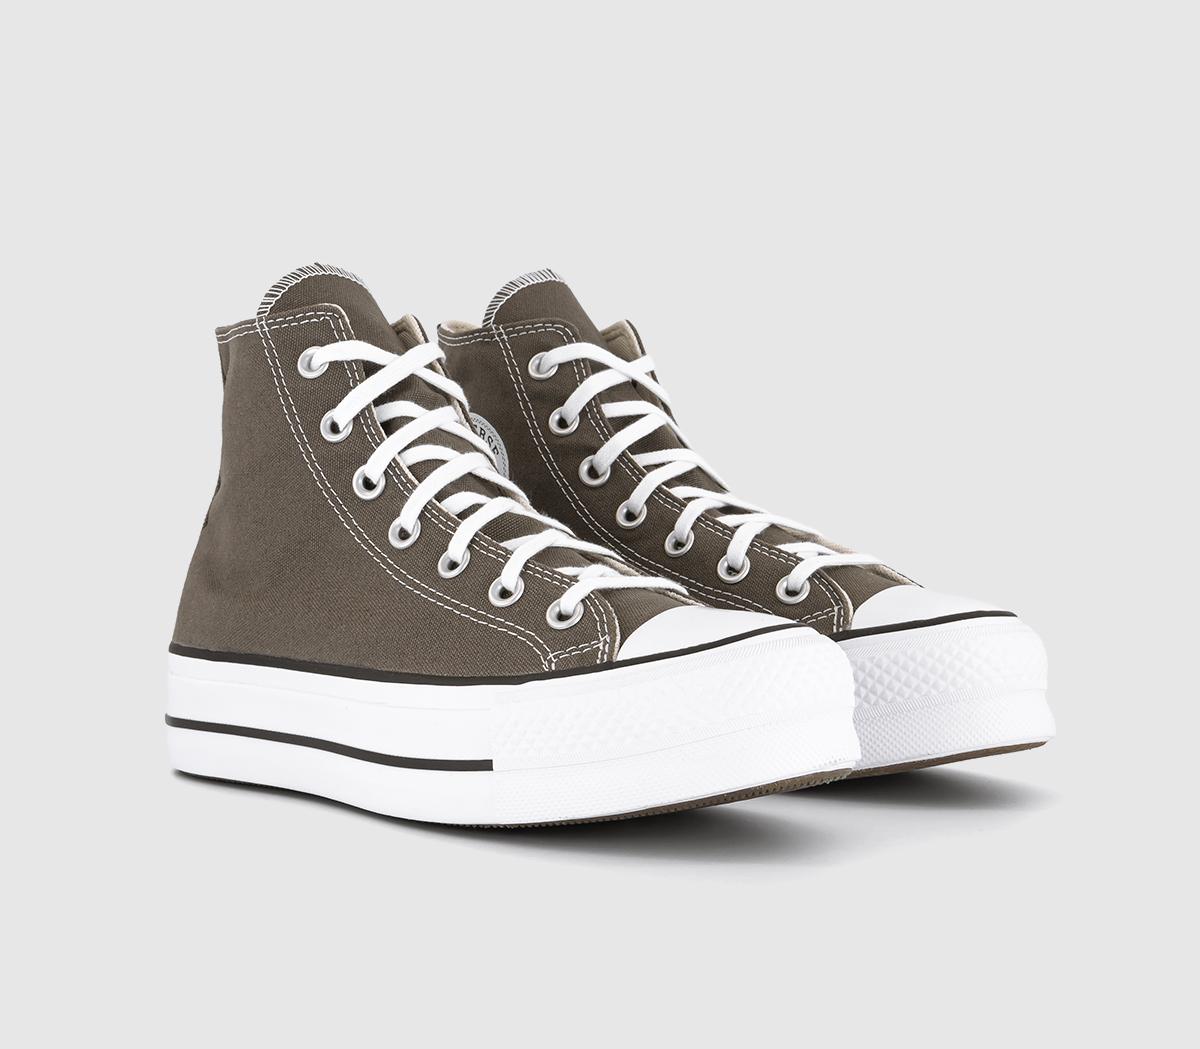 Converse Womens All Star Lift Hi Trainers Charcoal White Black, 5.5